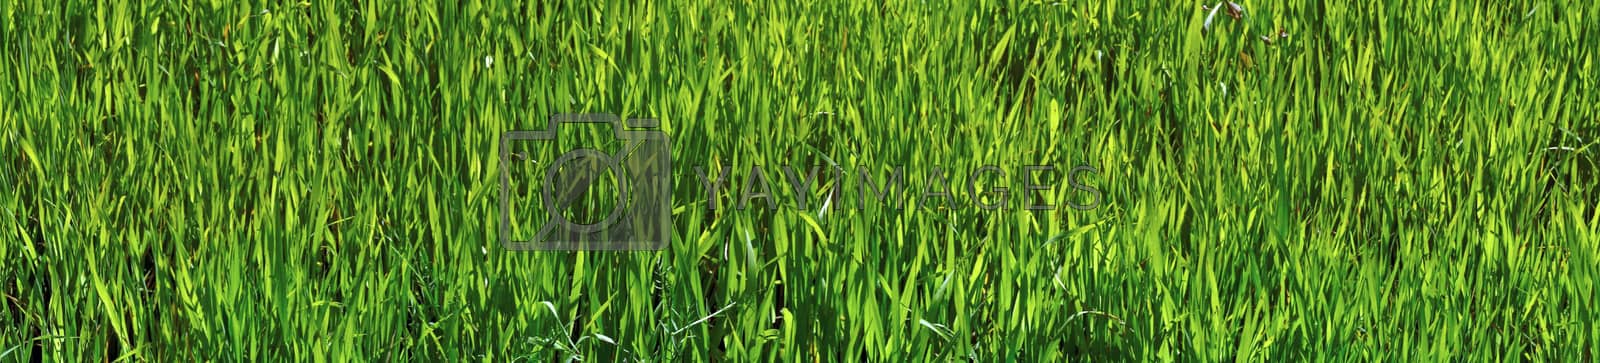 Royalty free image of Panoramic picture - green oats by Chiffanna